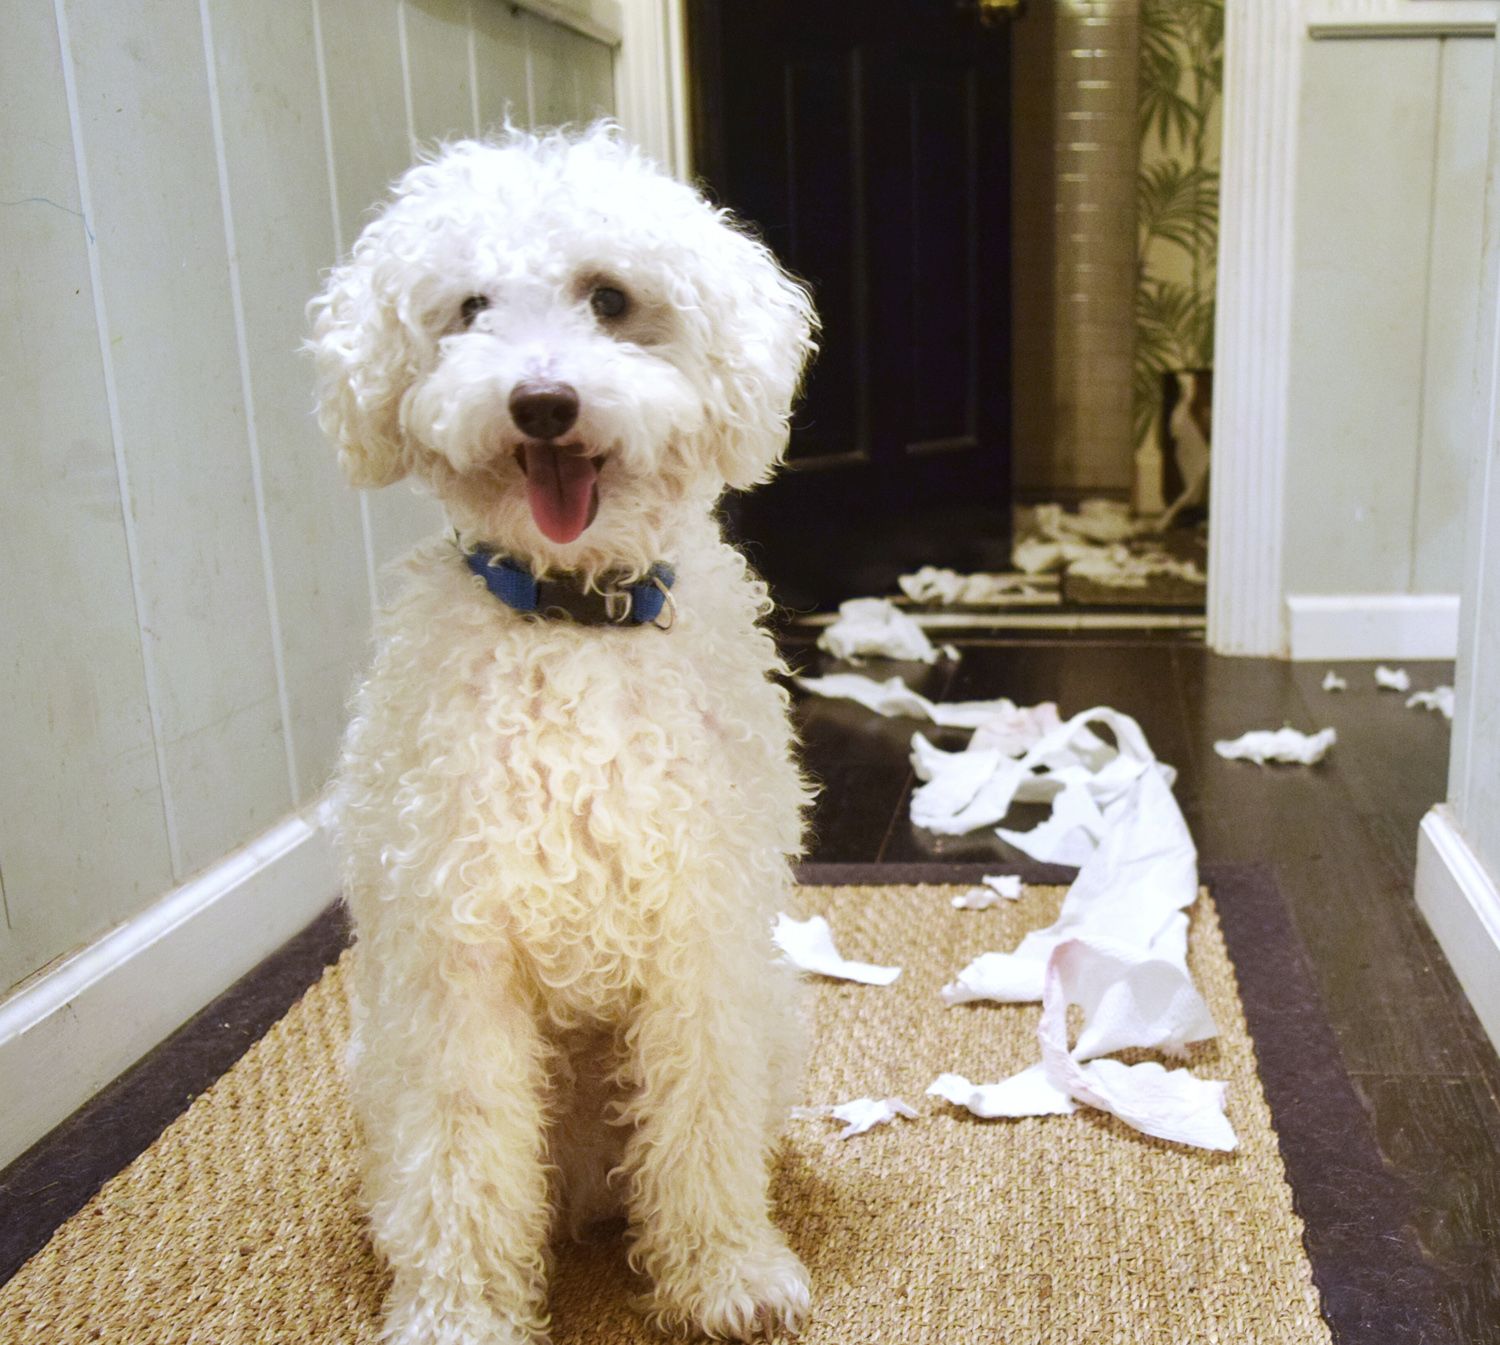 Funny cute poodle has just exited the bathroom with a toilet paper roll that he has chewed.